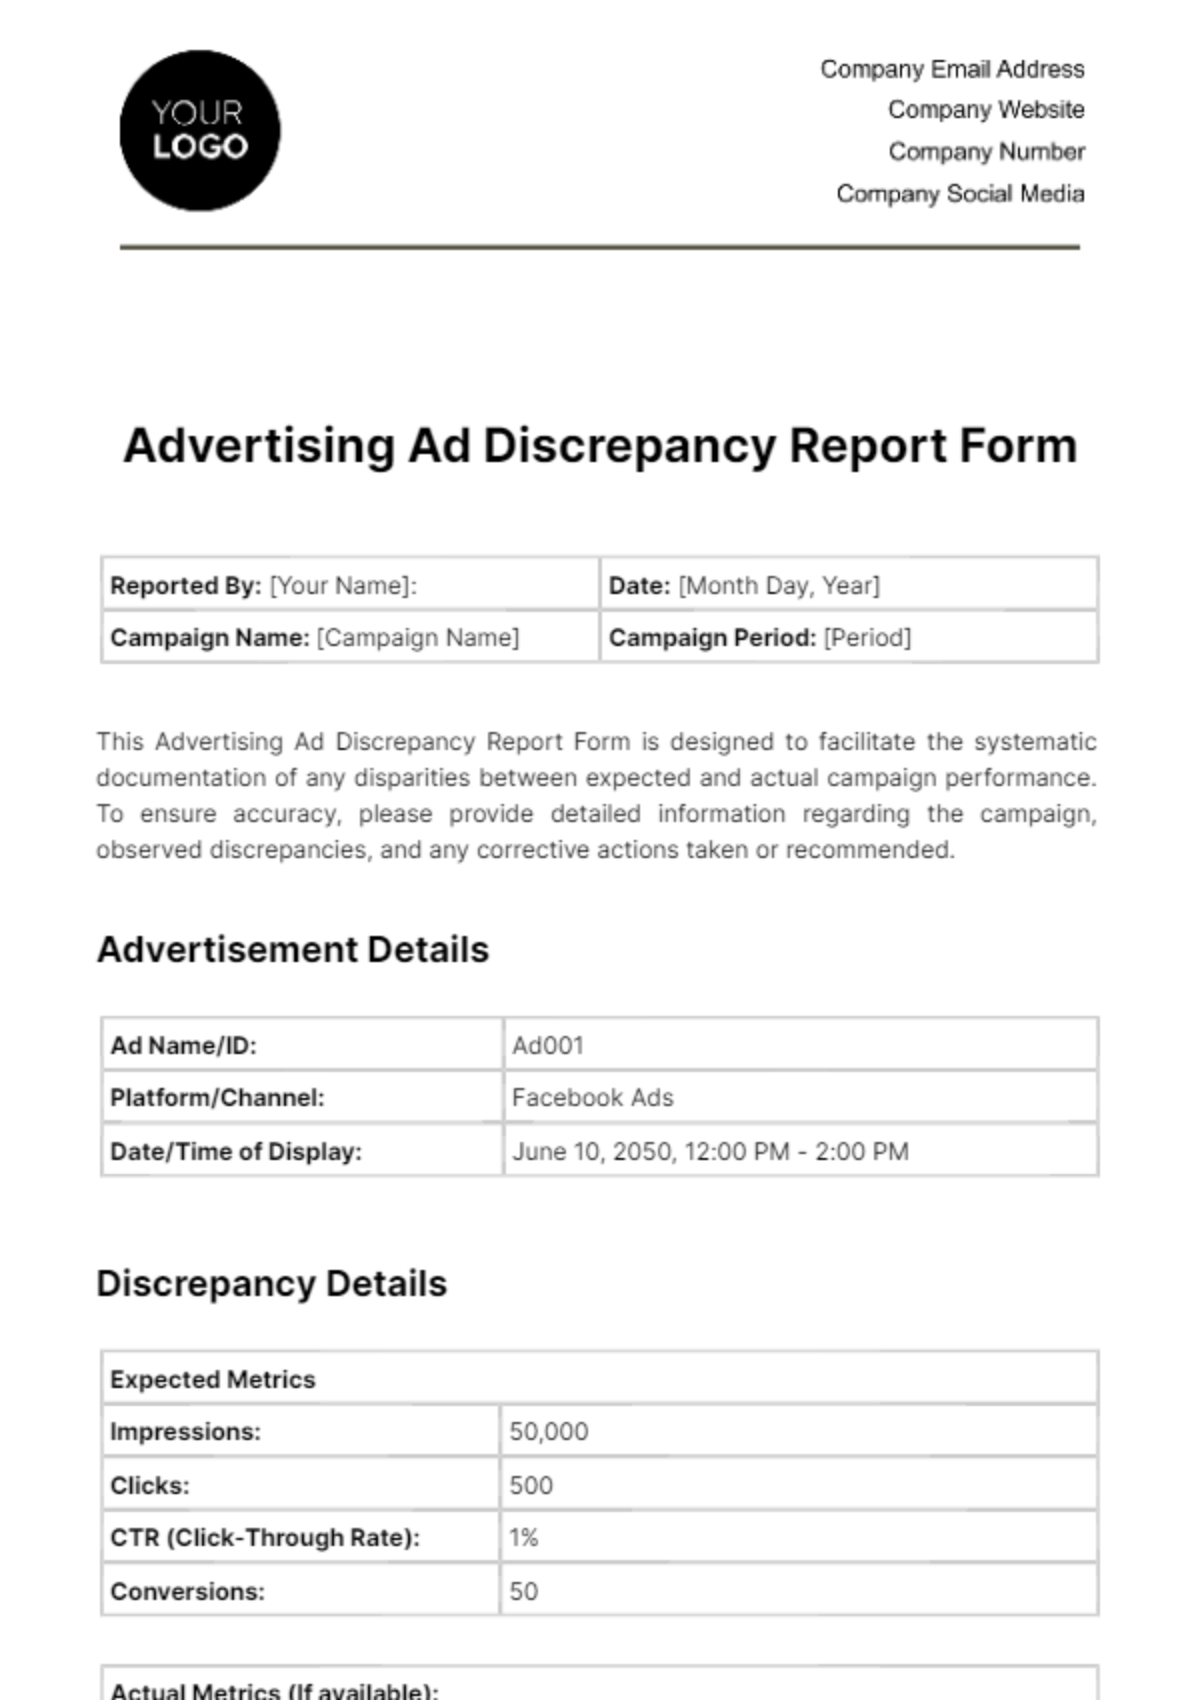 Free Advertising Ad Discrepancy Report Form Template